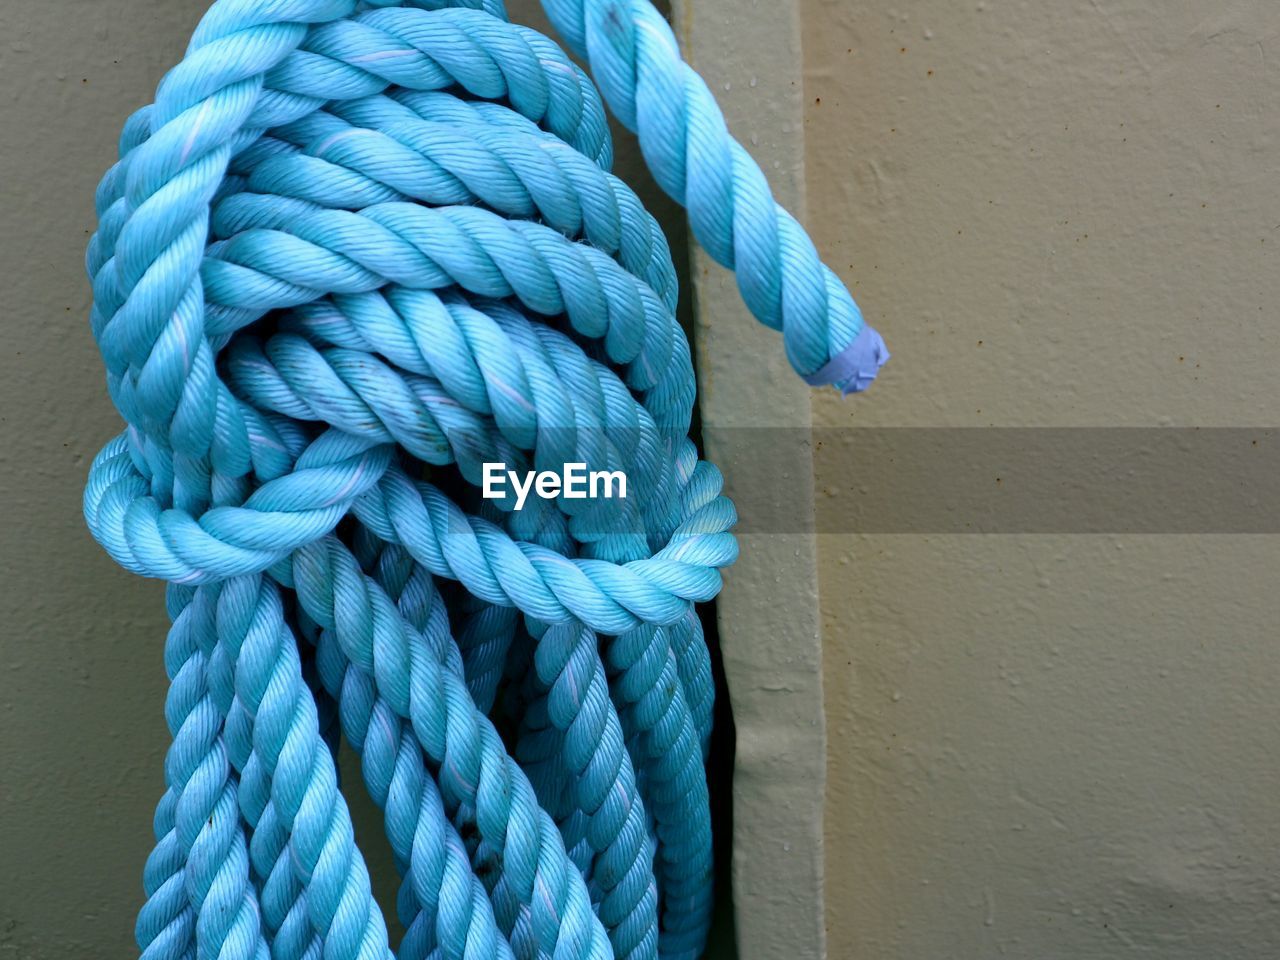 Coil of light blue rope against grey background